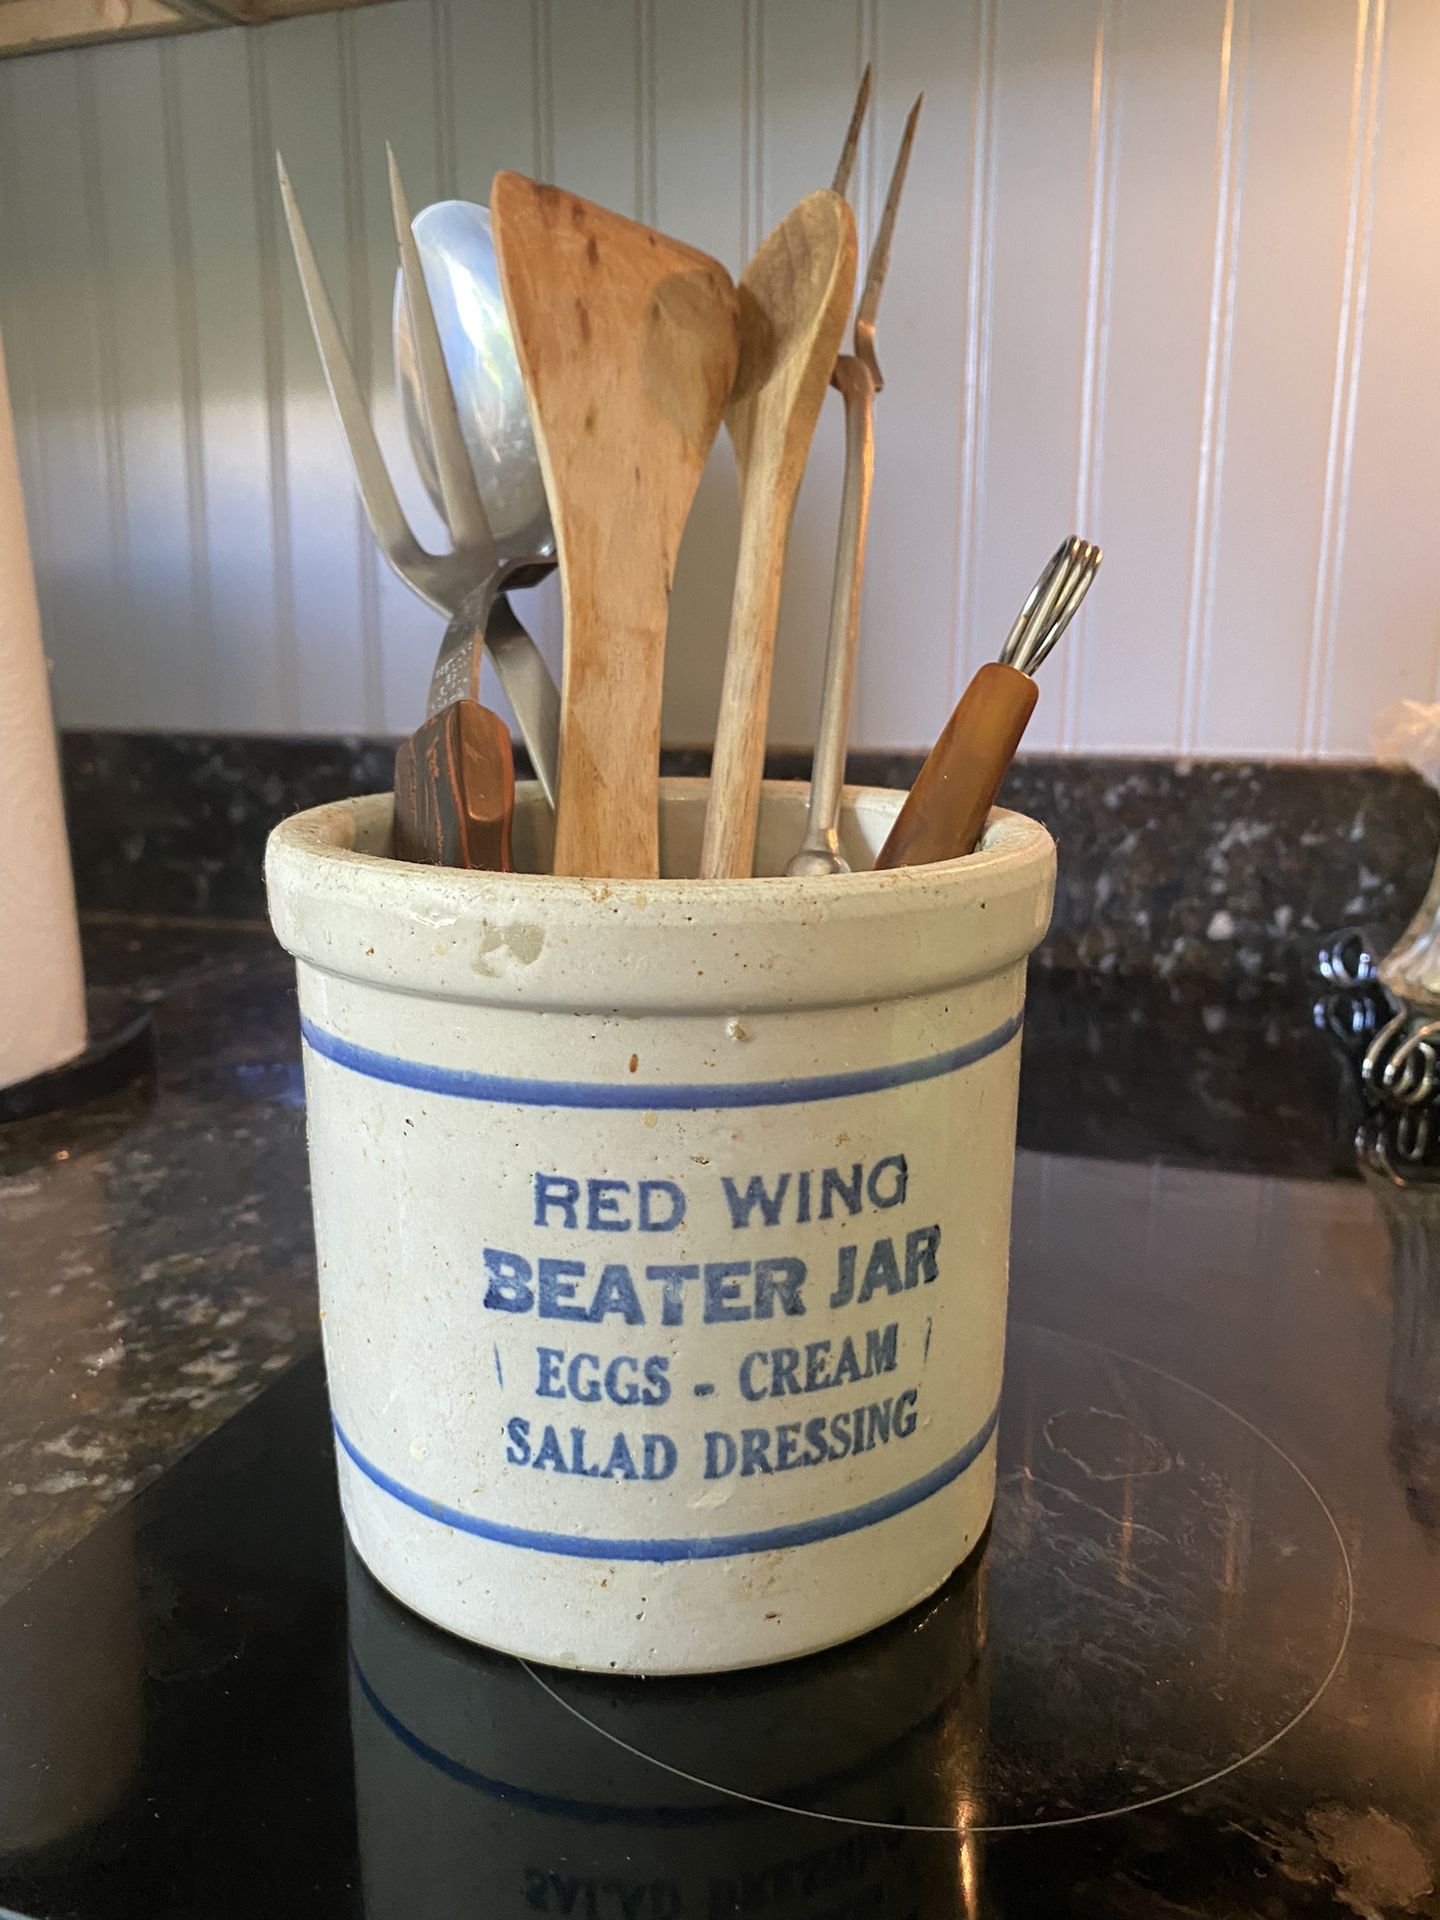 Red Wing Beater Jar Stone Ware 1920